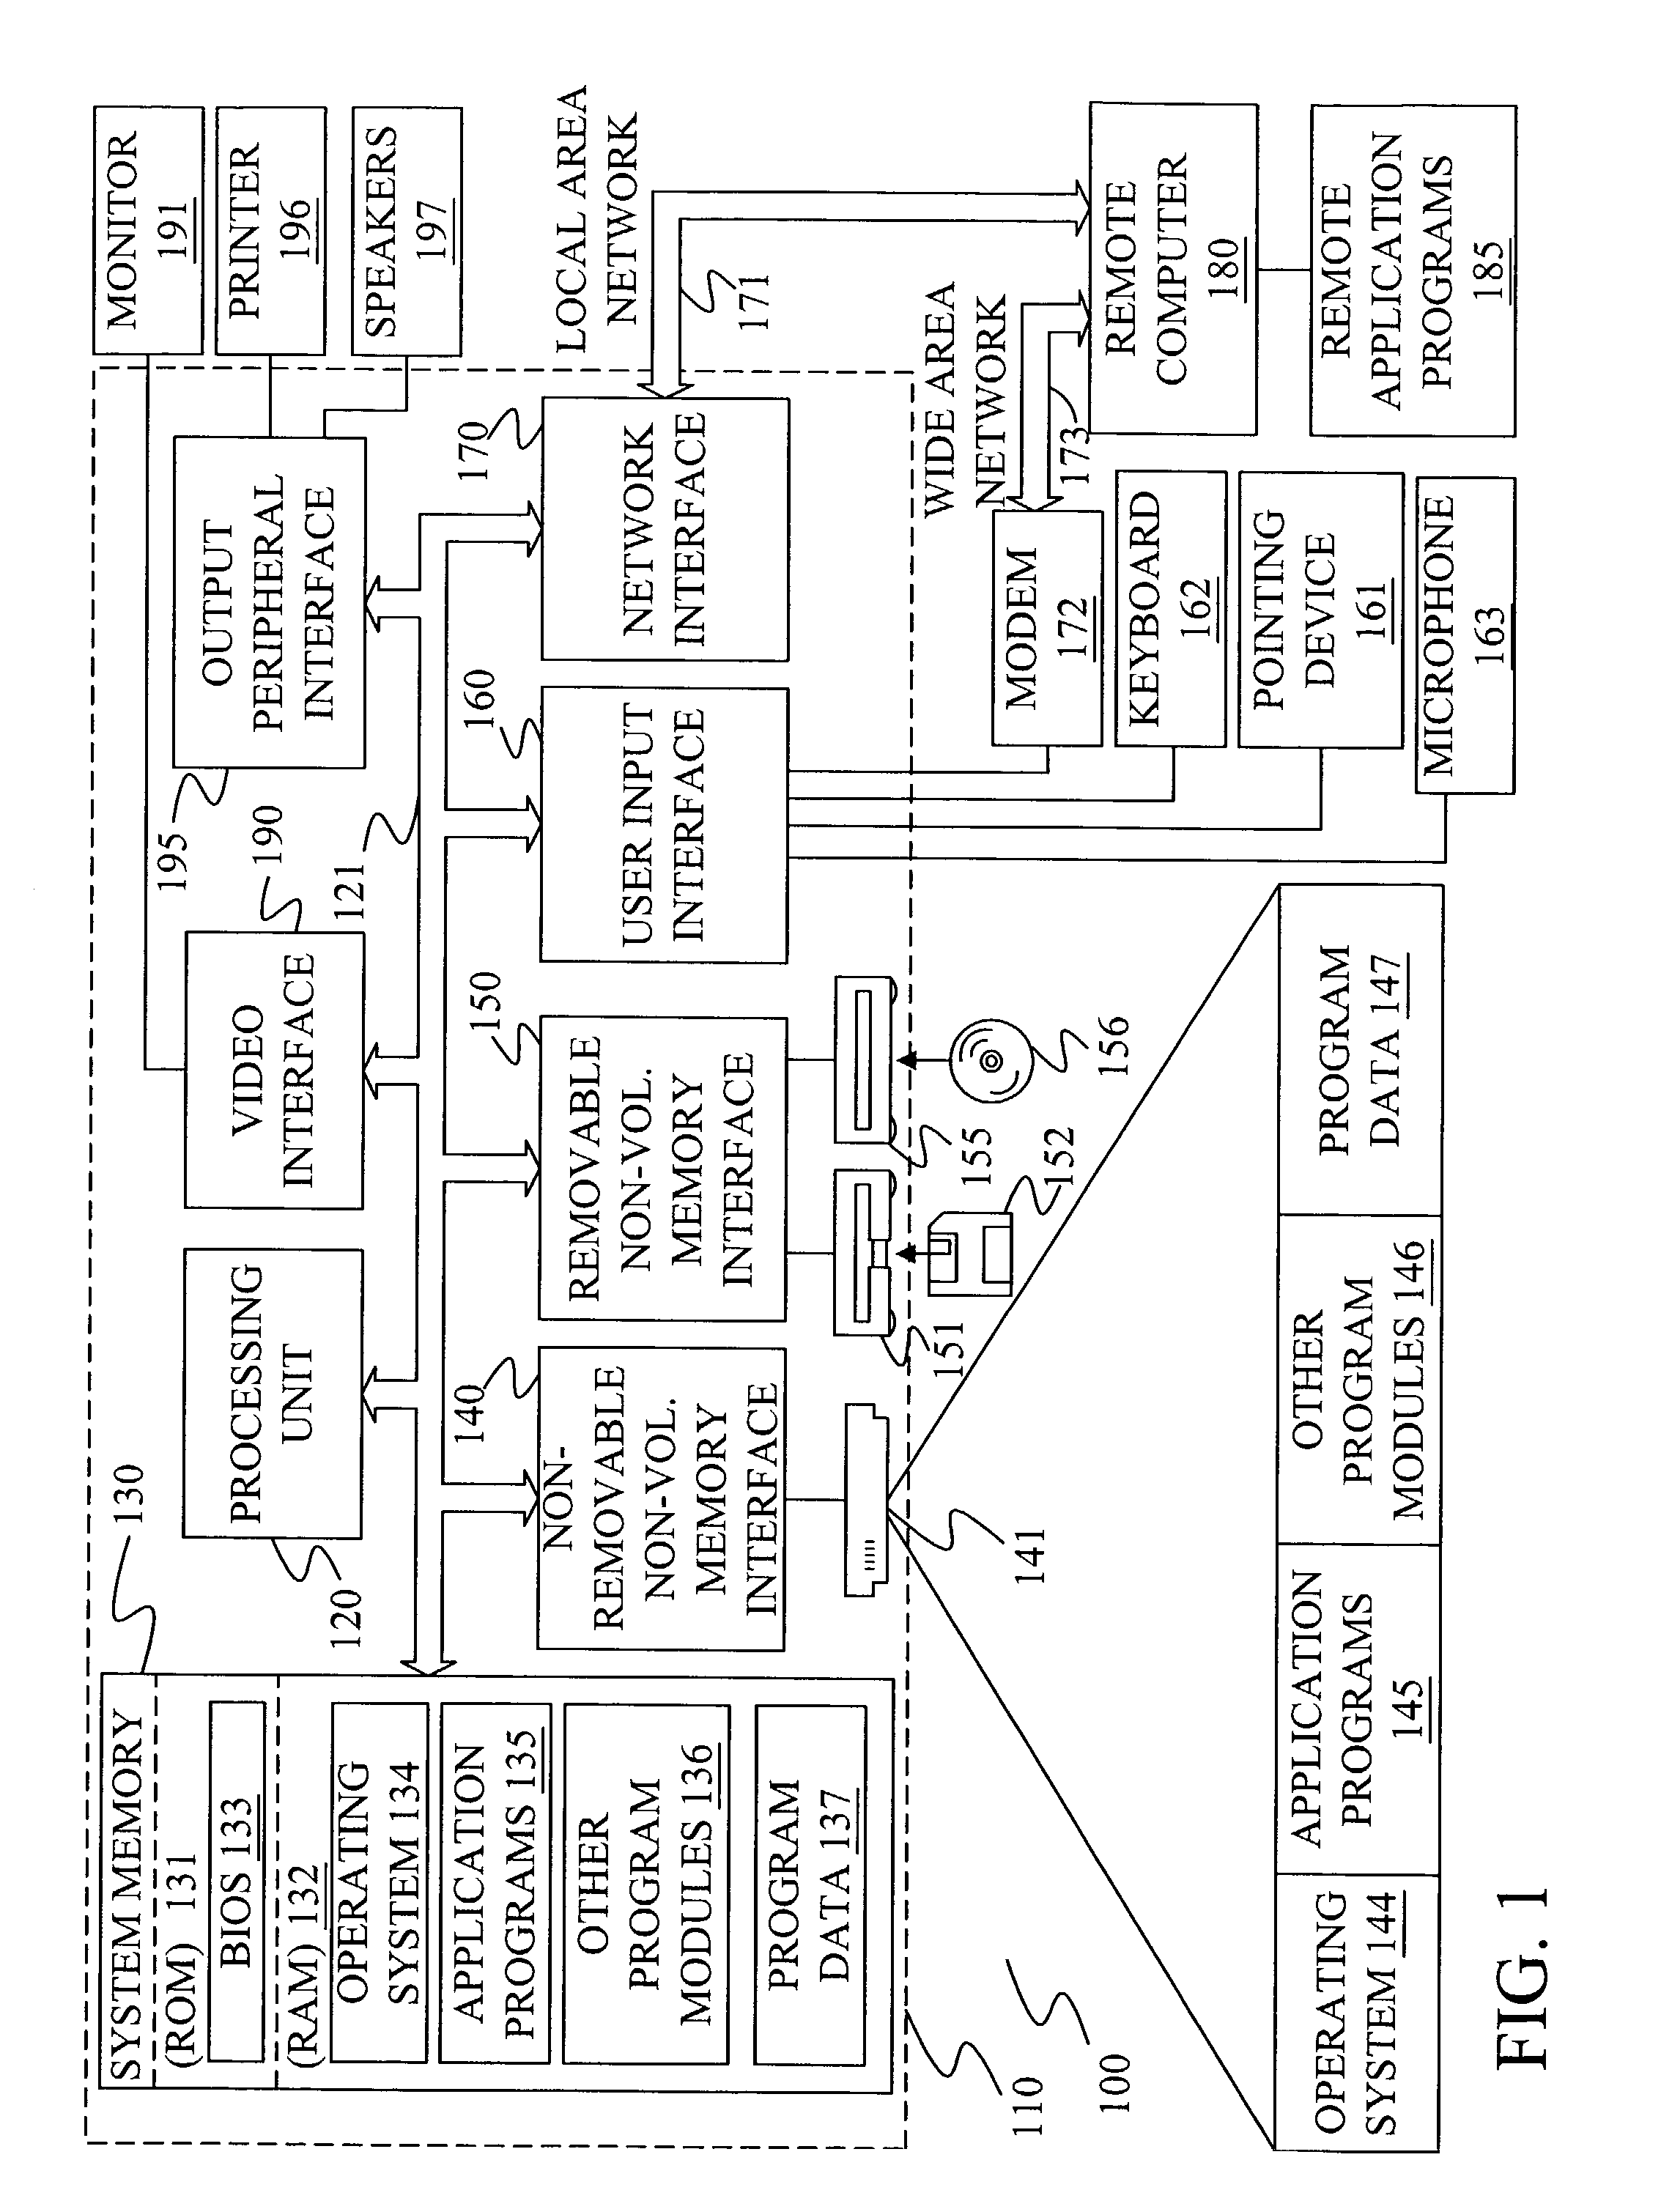 Method and system for retrieving hint sentences using expanded queries